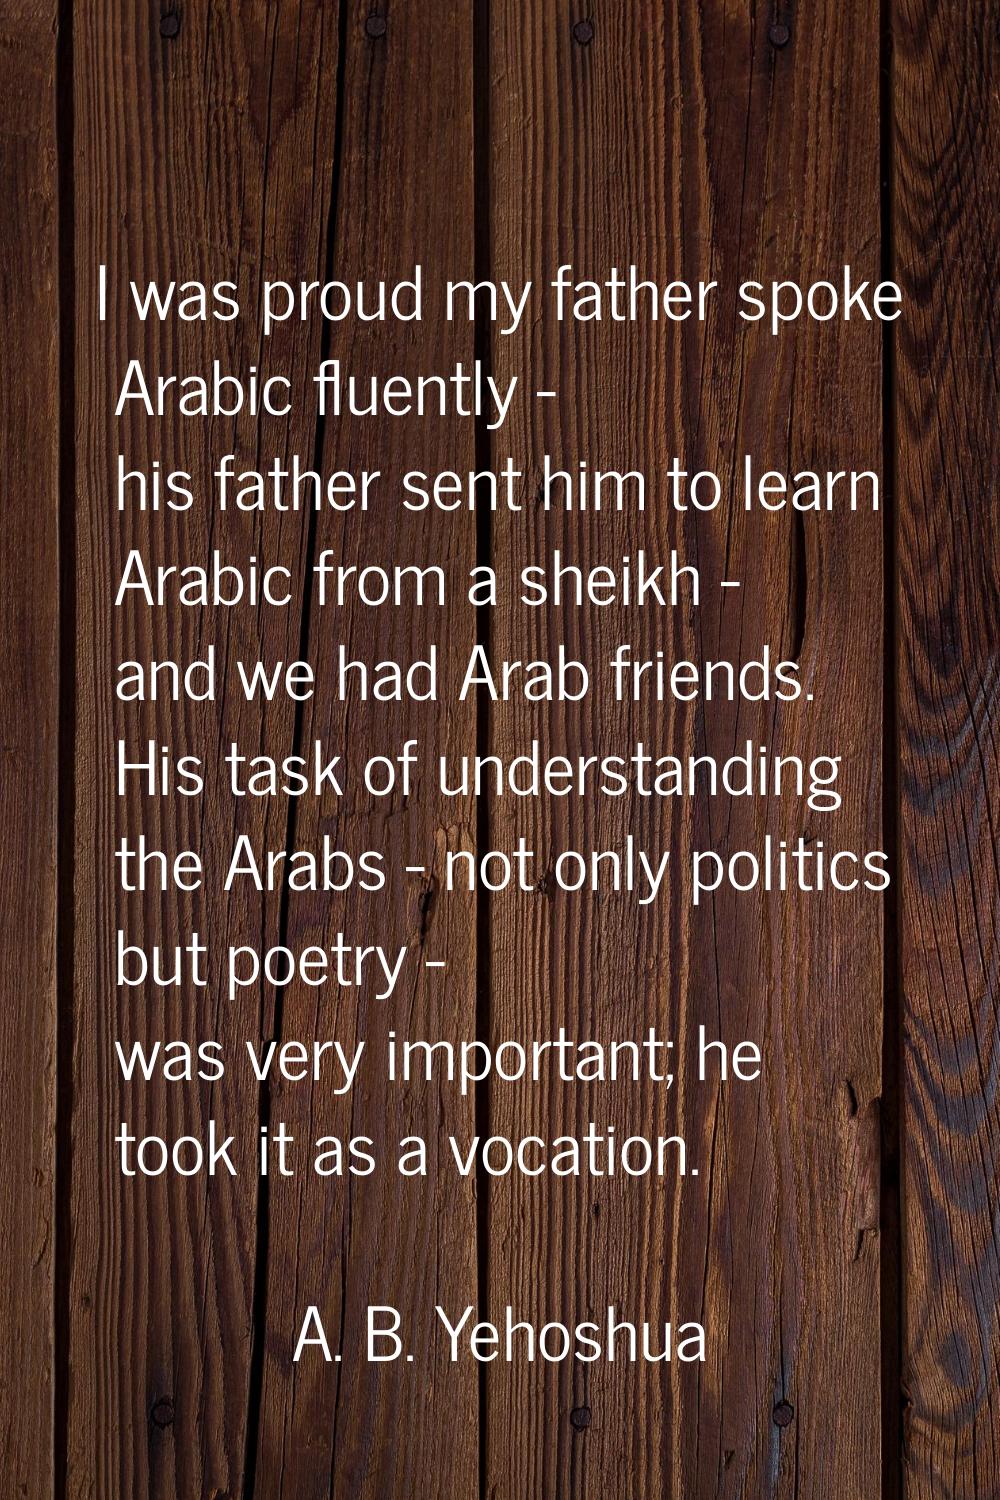 I was proud my father spoke Arabic fluently - his father sent him to learn Arabic from a sheikh - a